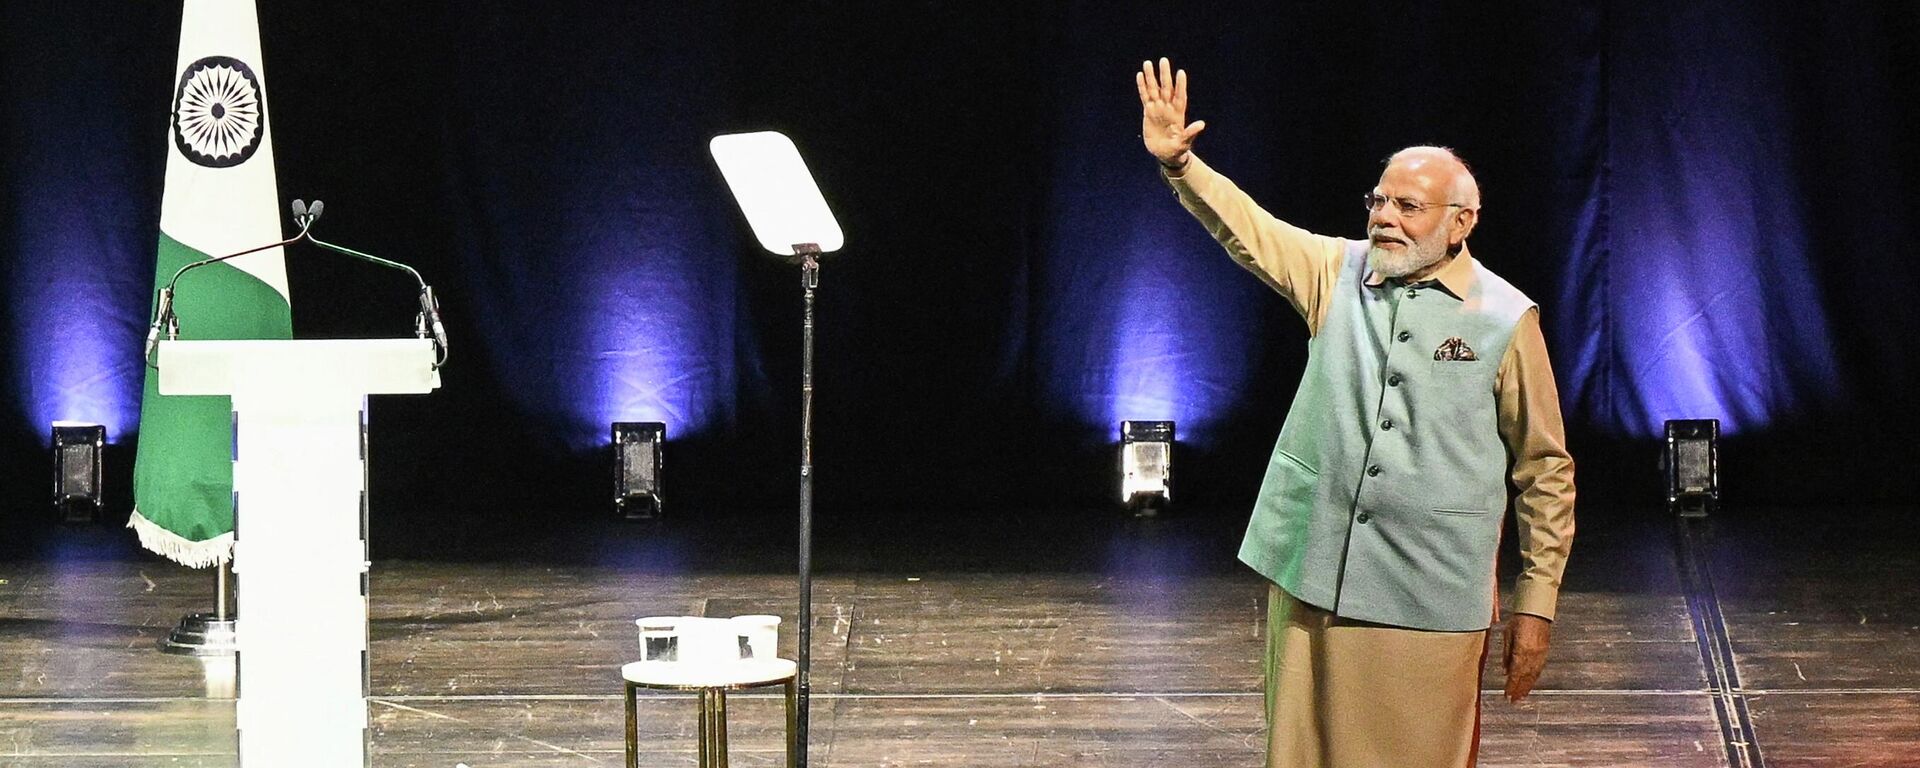 Indian Prime Minister Narendra Modi waves on stage as he delivers a speech at the Seine Musicale in Boulogne-Billancourt, Paris suburb on July 13, 2023. - Sputnik India, 1920, 23.07.2023